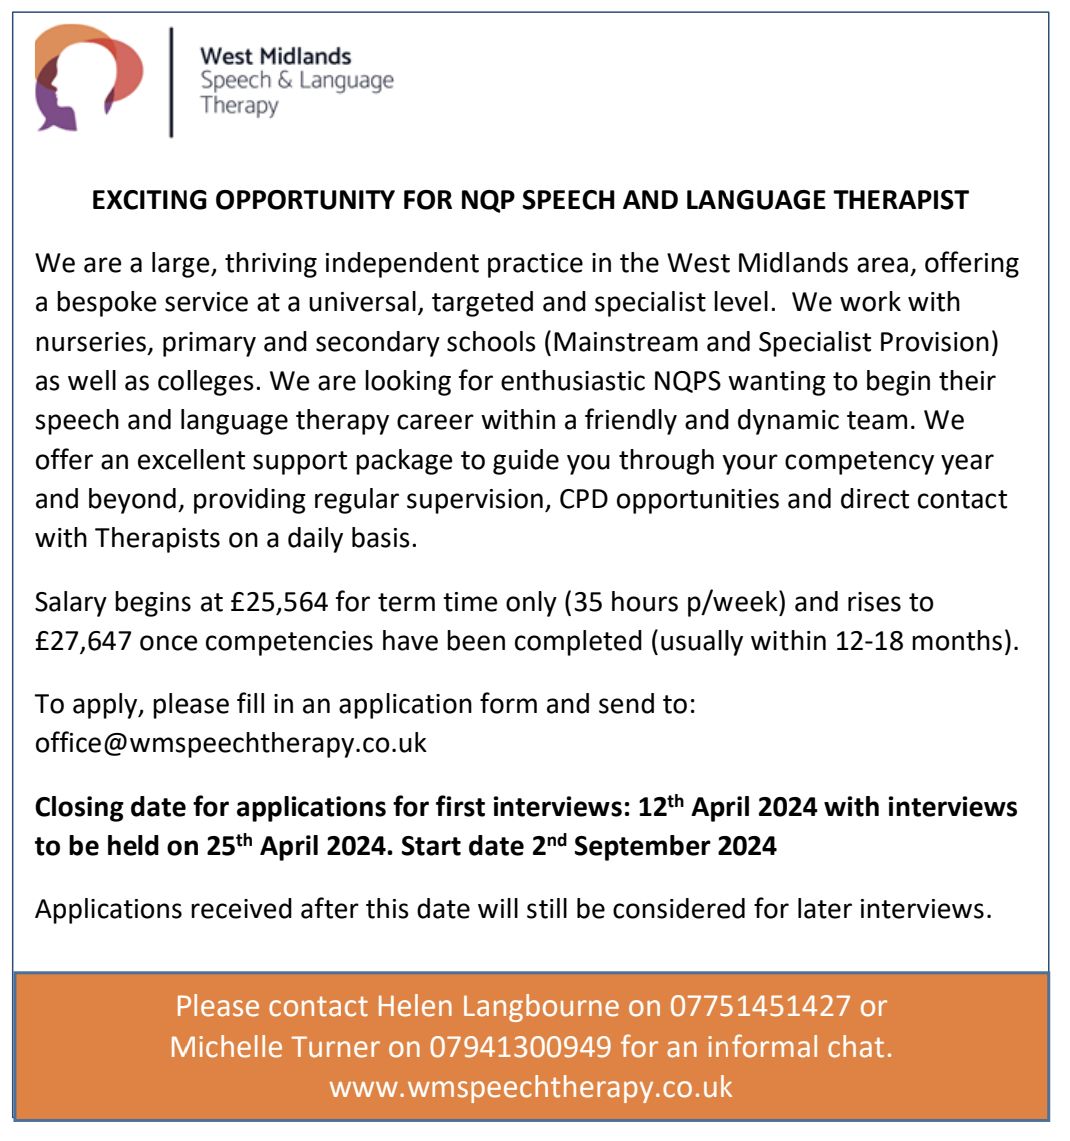 📢📢 WMSLT are HIRING! 

We have an exciting opportunity for a Newly Qualified Speech and Language Therapist to join our team 😄 

➡️ Application form and more details here: wmspeechtherapy.co.uk/transform-live…

#slcnjobs #slt2be #sltjobs #nqpslt